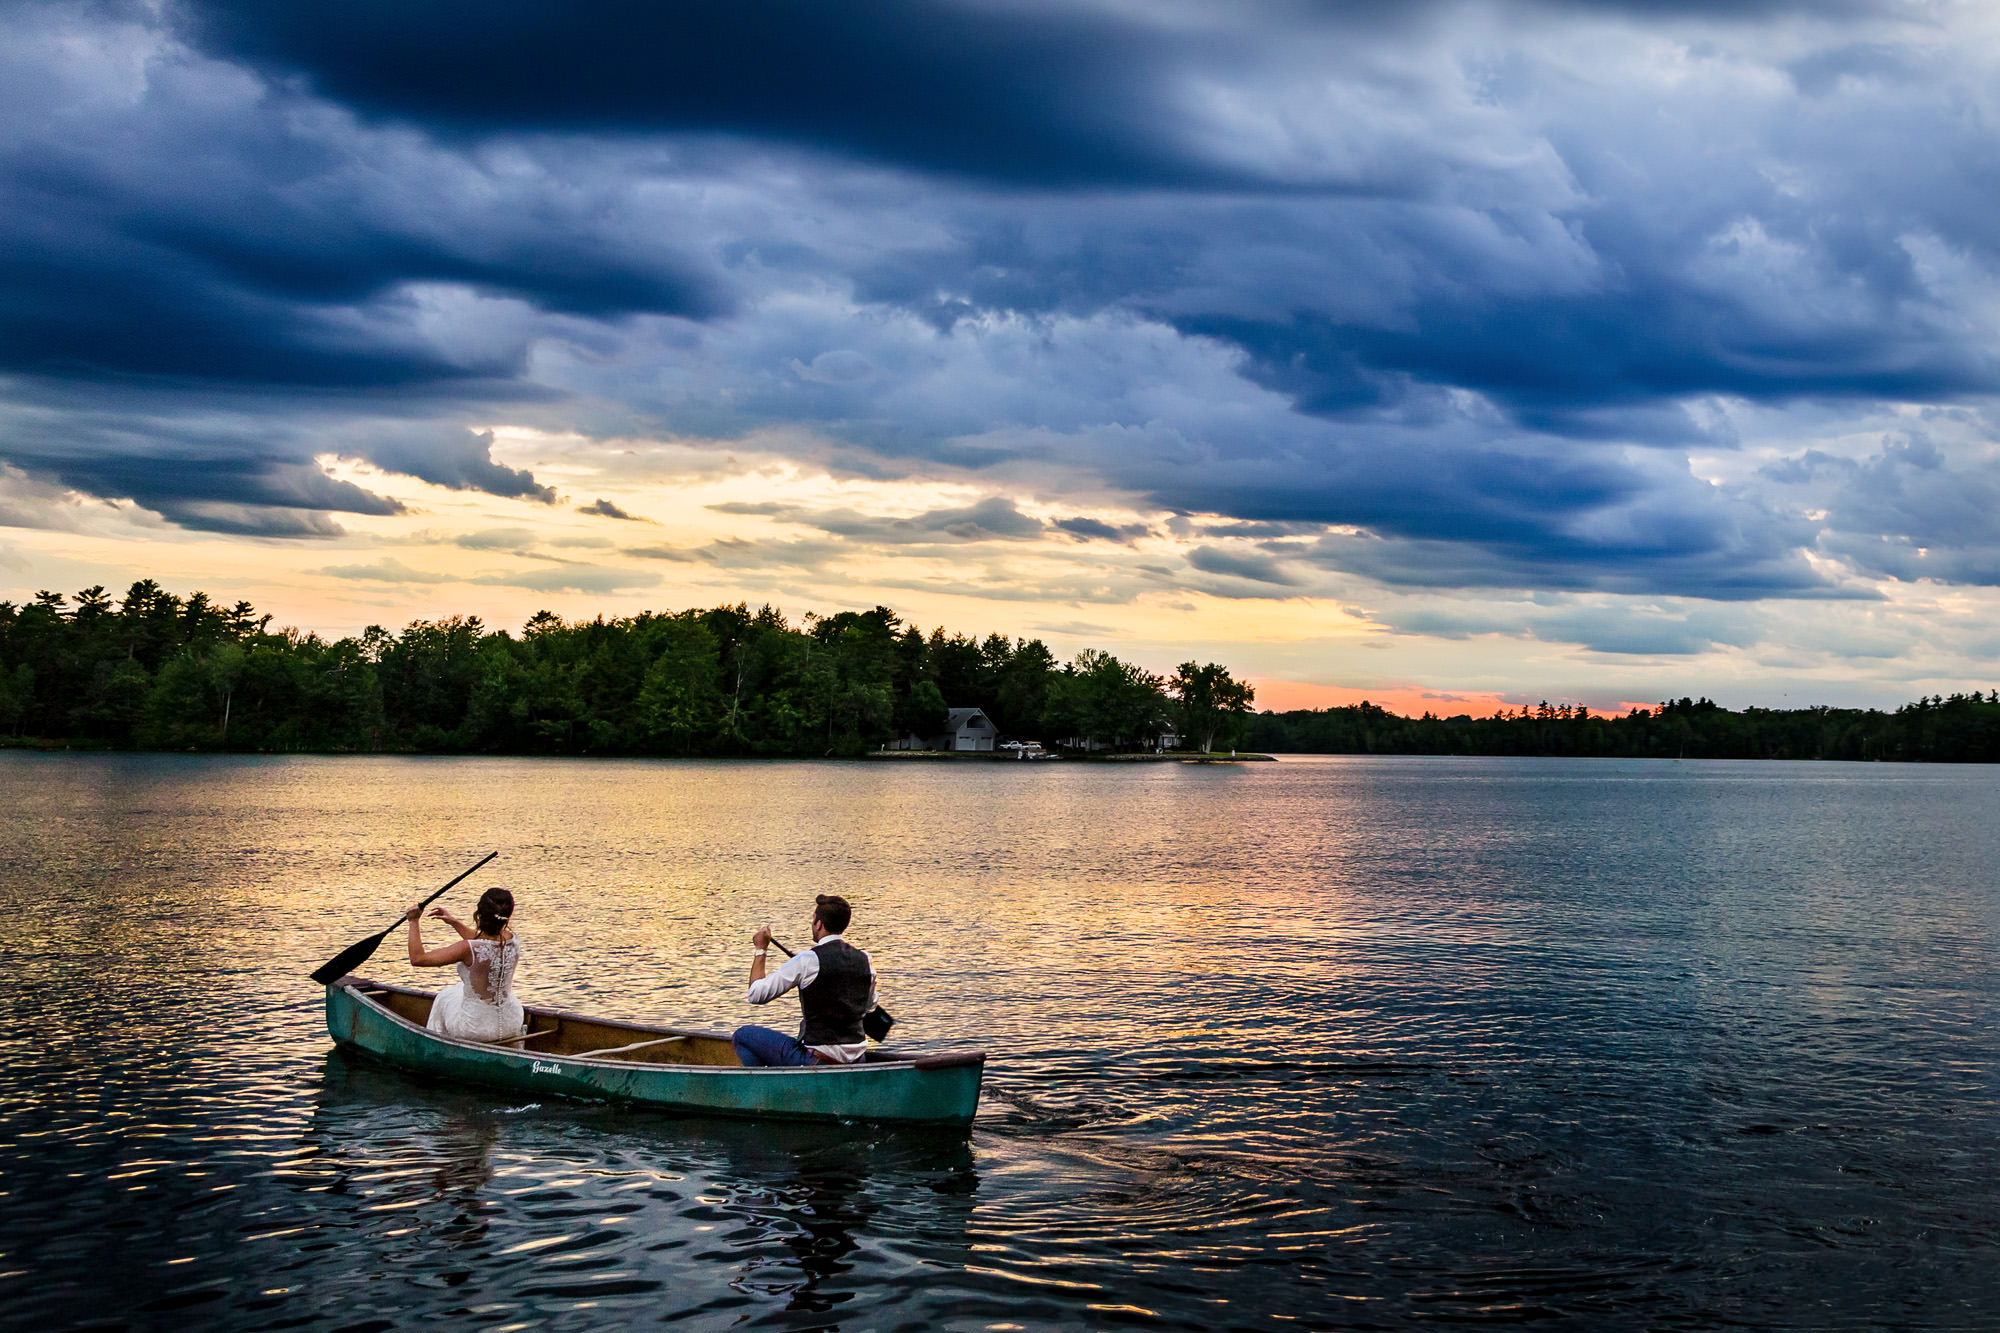 A romantic couple in a canoe, surrounded by a serene lake at sunset, on their special day.